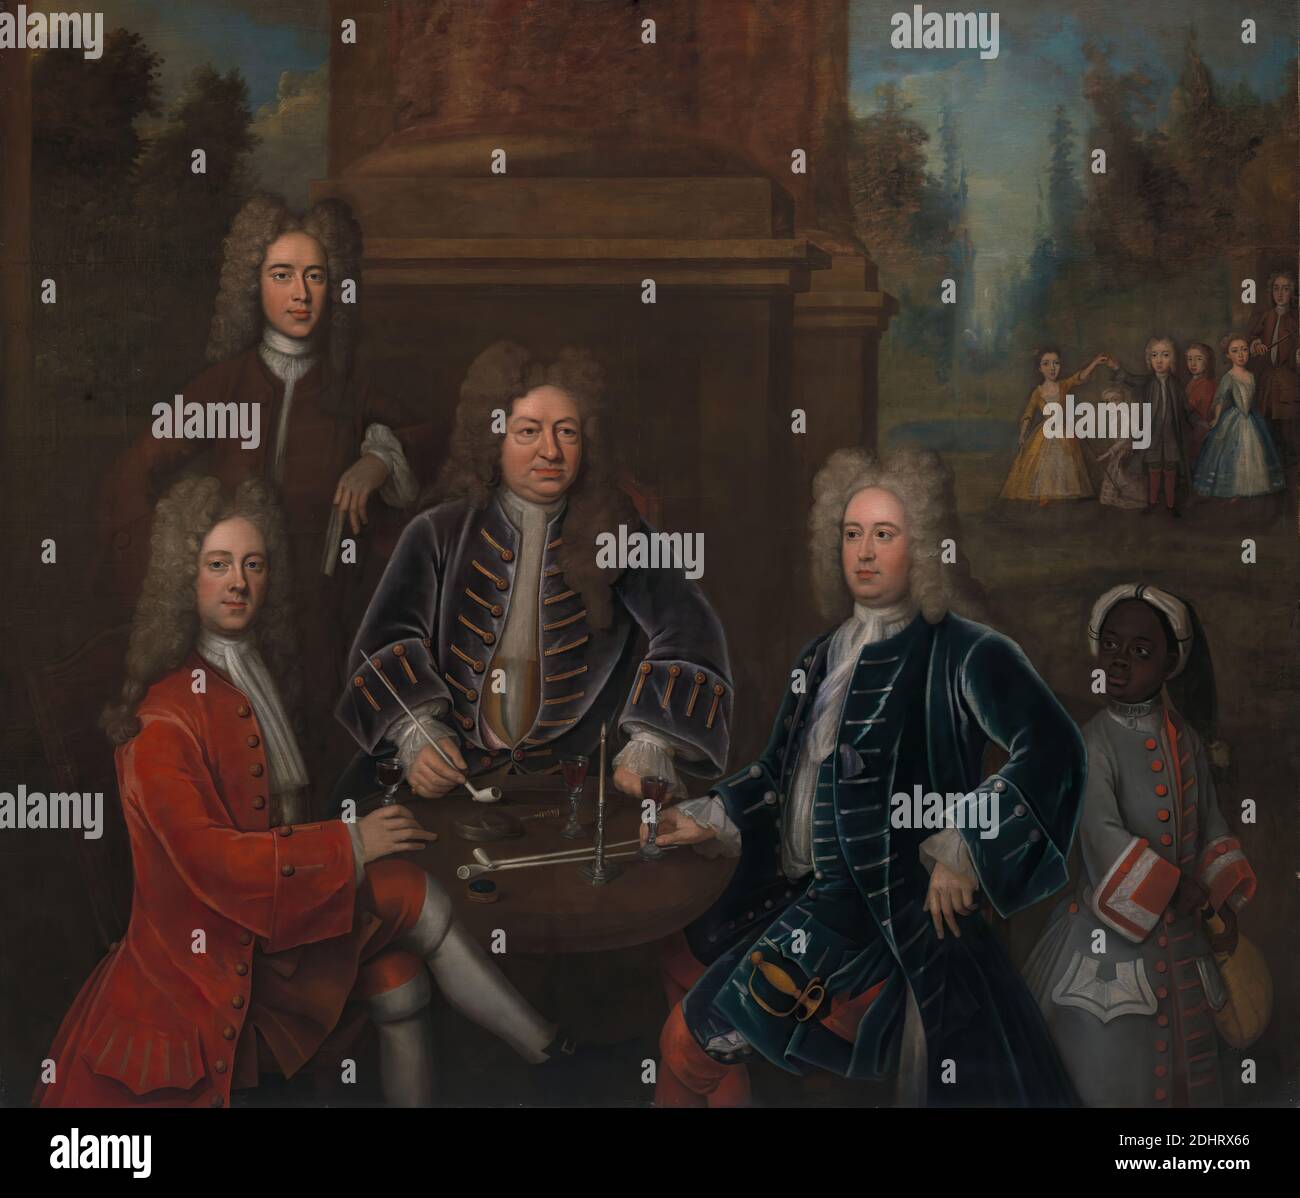 Elihu Yale; William Cavendish, the second Duke of Devonshire; Lord James Cavendish; Mr. Tunstal; and an Enslaved Servant, Unknown artist, eighteenth century, ca. 1708, Oil on canvas, Support (PTG): 79 1/4 x 92 3/4 inches (201.3 x 235.6 cm), boy, candle, children, column (architectural element), conversation piece, diamond, discussions, drinking, drinking glasses, duke, feast, food, group portrait, landscape, men, page, pen, pipes (smoking equipment), portrait, ring, slave, smoking, snuff boxes, spectators, sword, wigs, wine, writing (processes Stock Photo